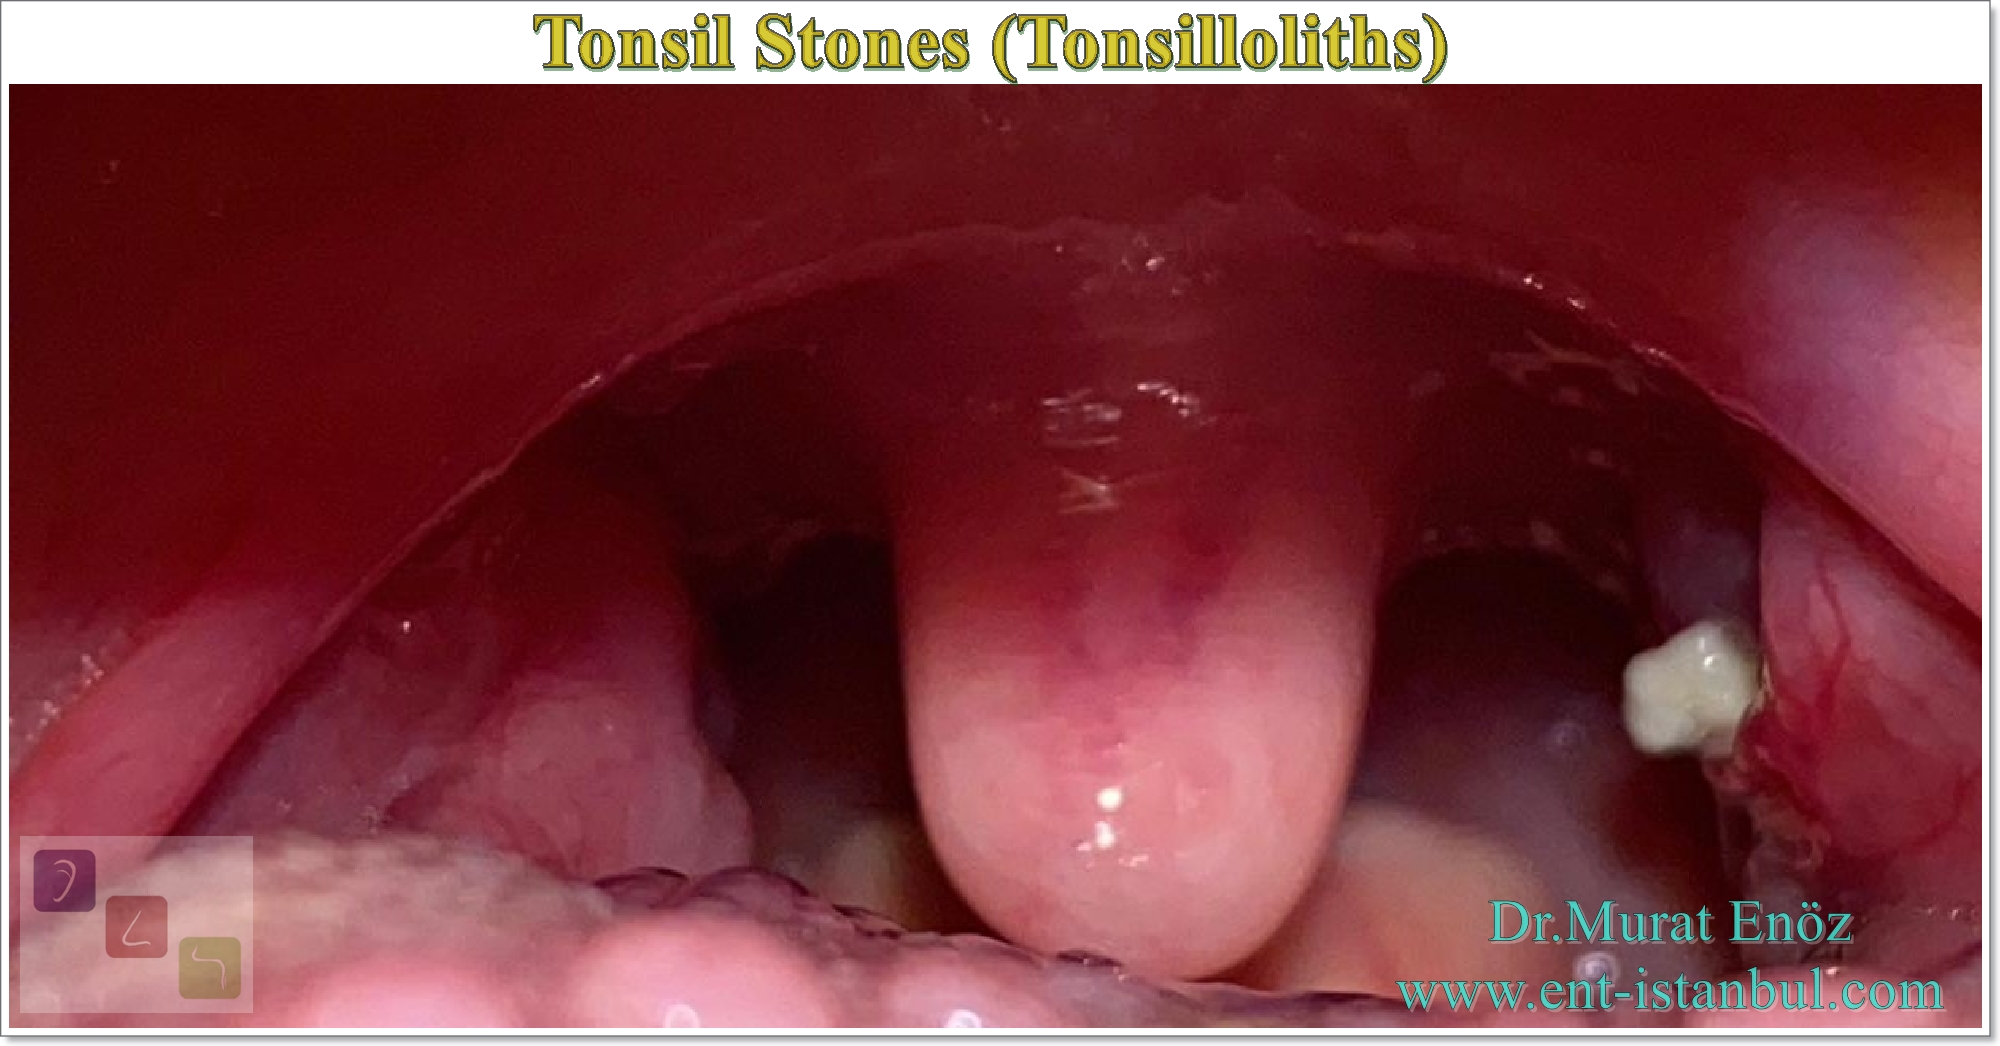 tonsil stone removal